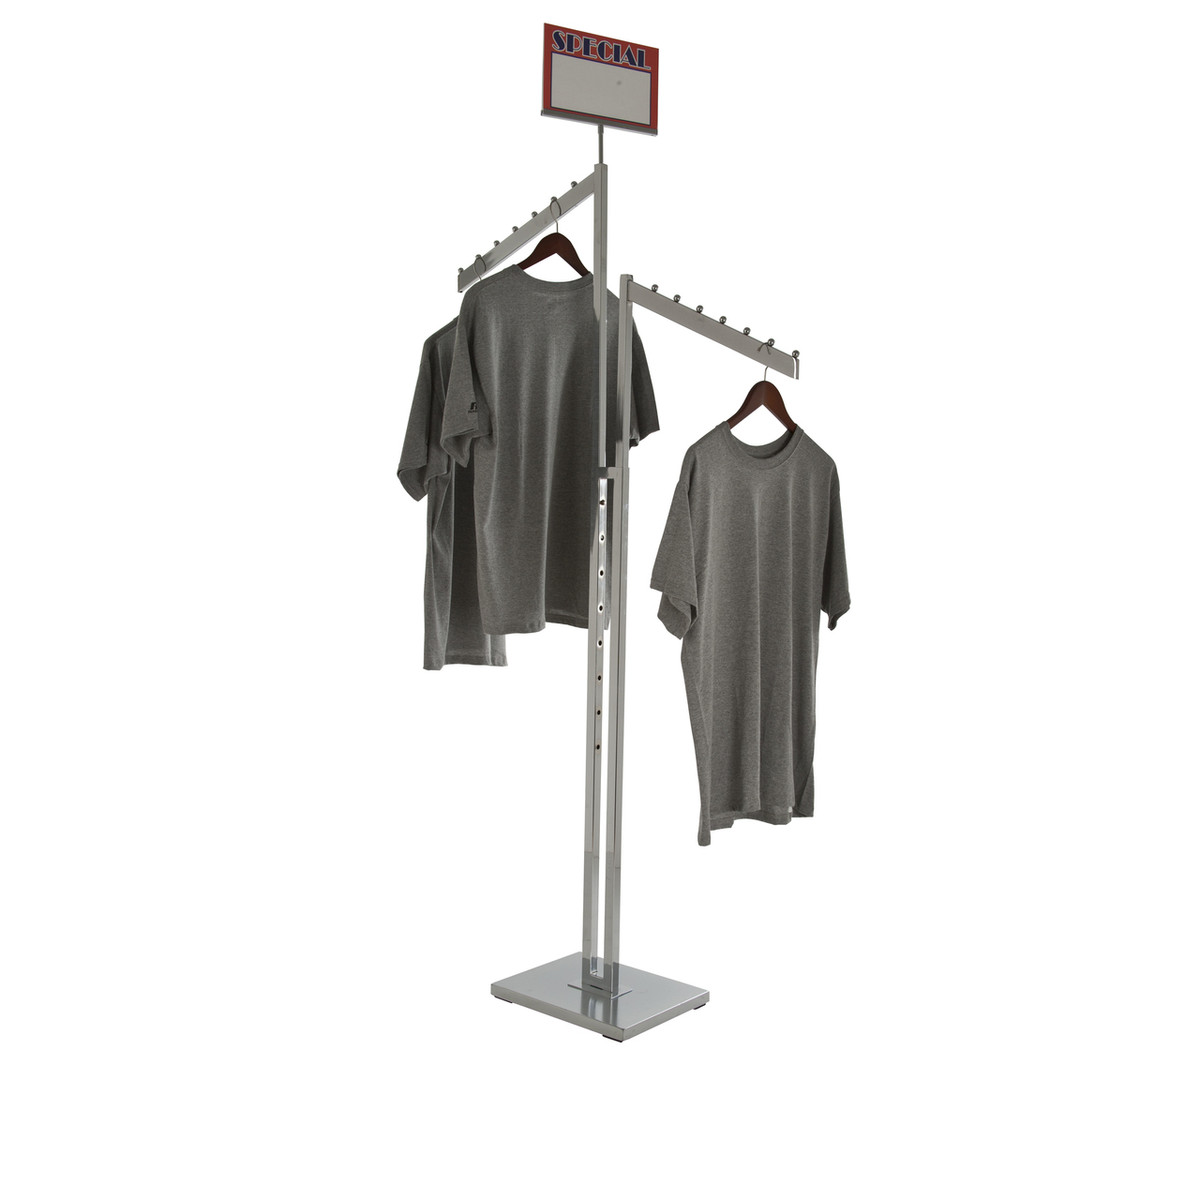 Two Sided Clothing Rack with TWO Waterfall Display Arms